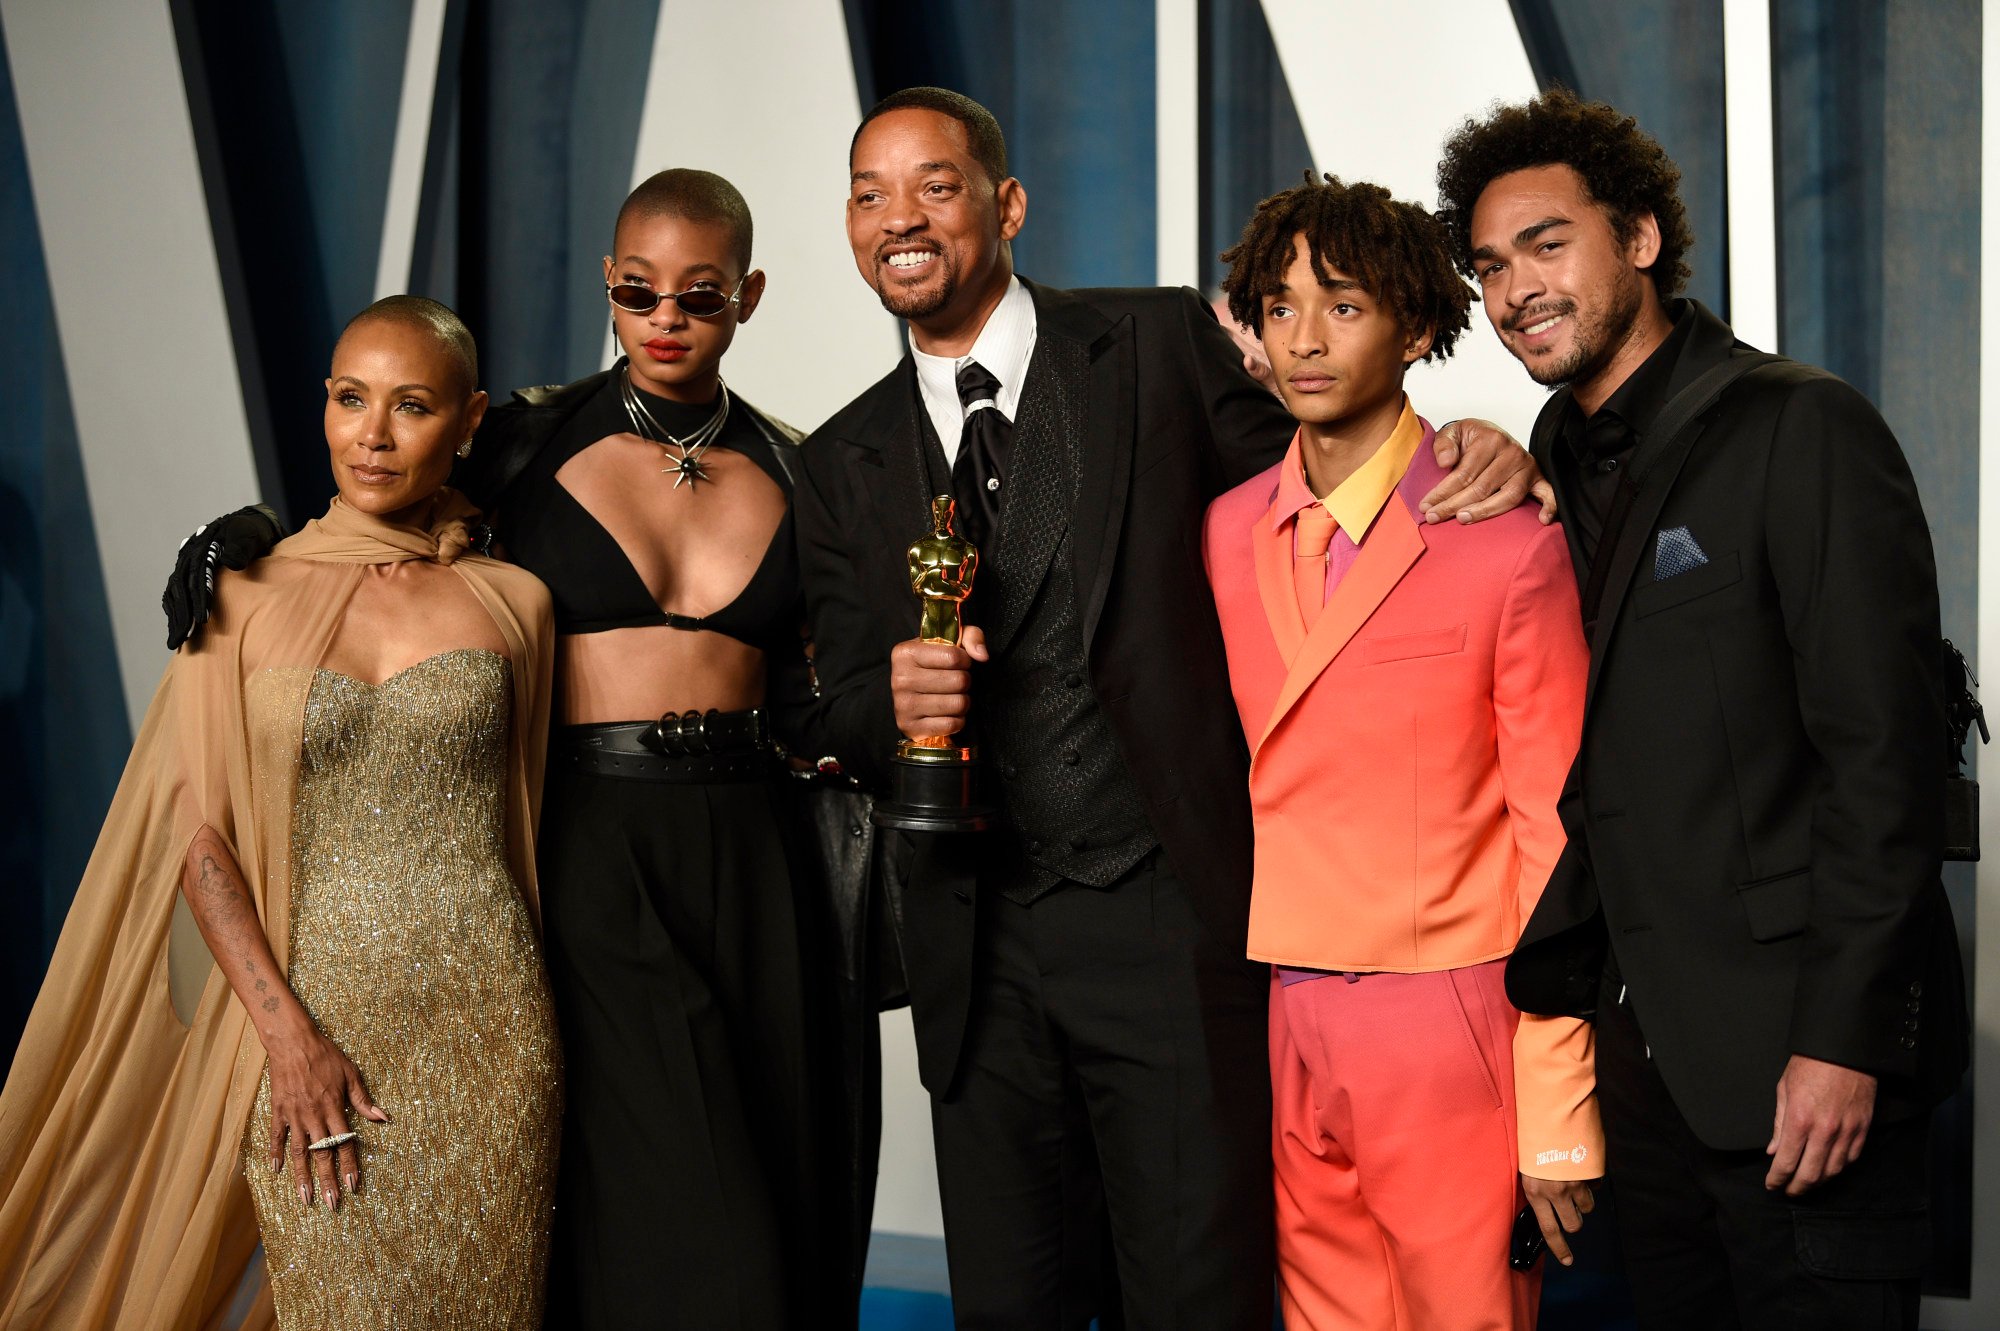 Jada Pinkett Smith, Willow Smith, Will Smith, Jaden Smith and Trey Smith arrive at the Vanity Fair Oscar Party on March 27, at the Wallis Annenberg Center for the Performing Arts in Beverly Hills, California. Photo: AP